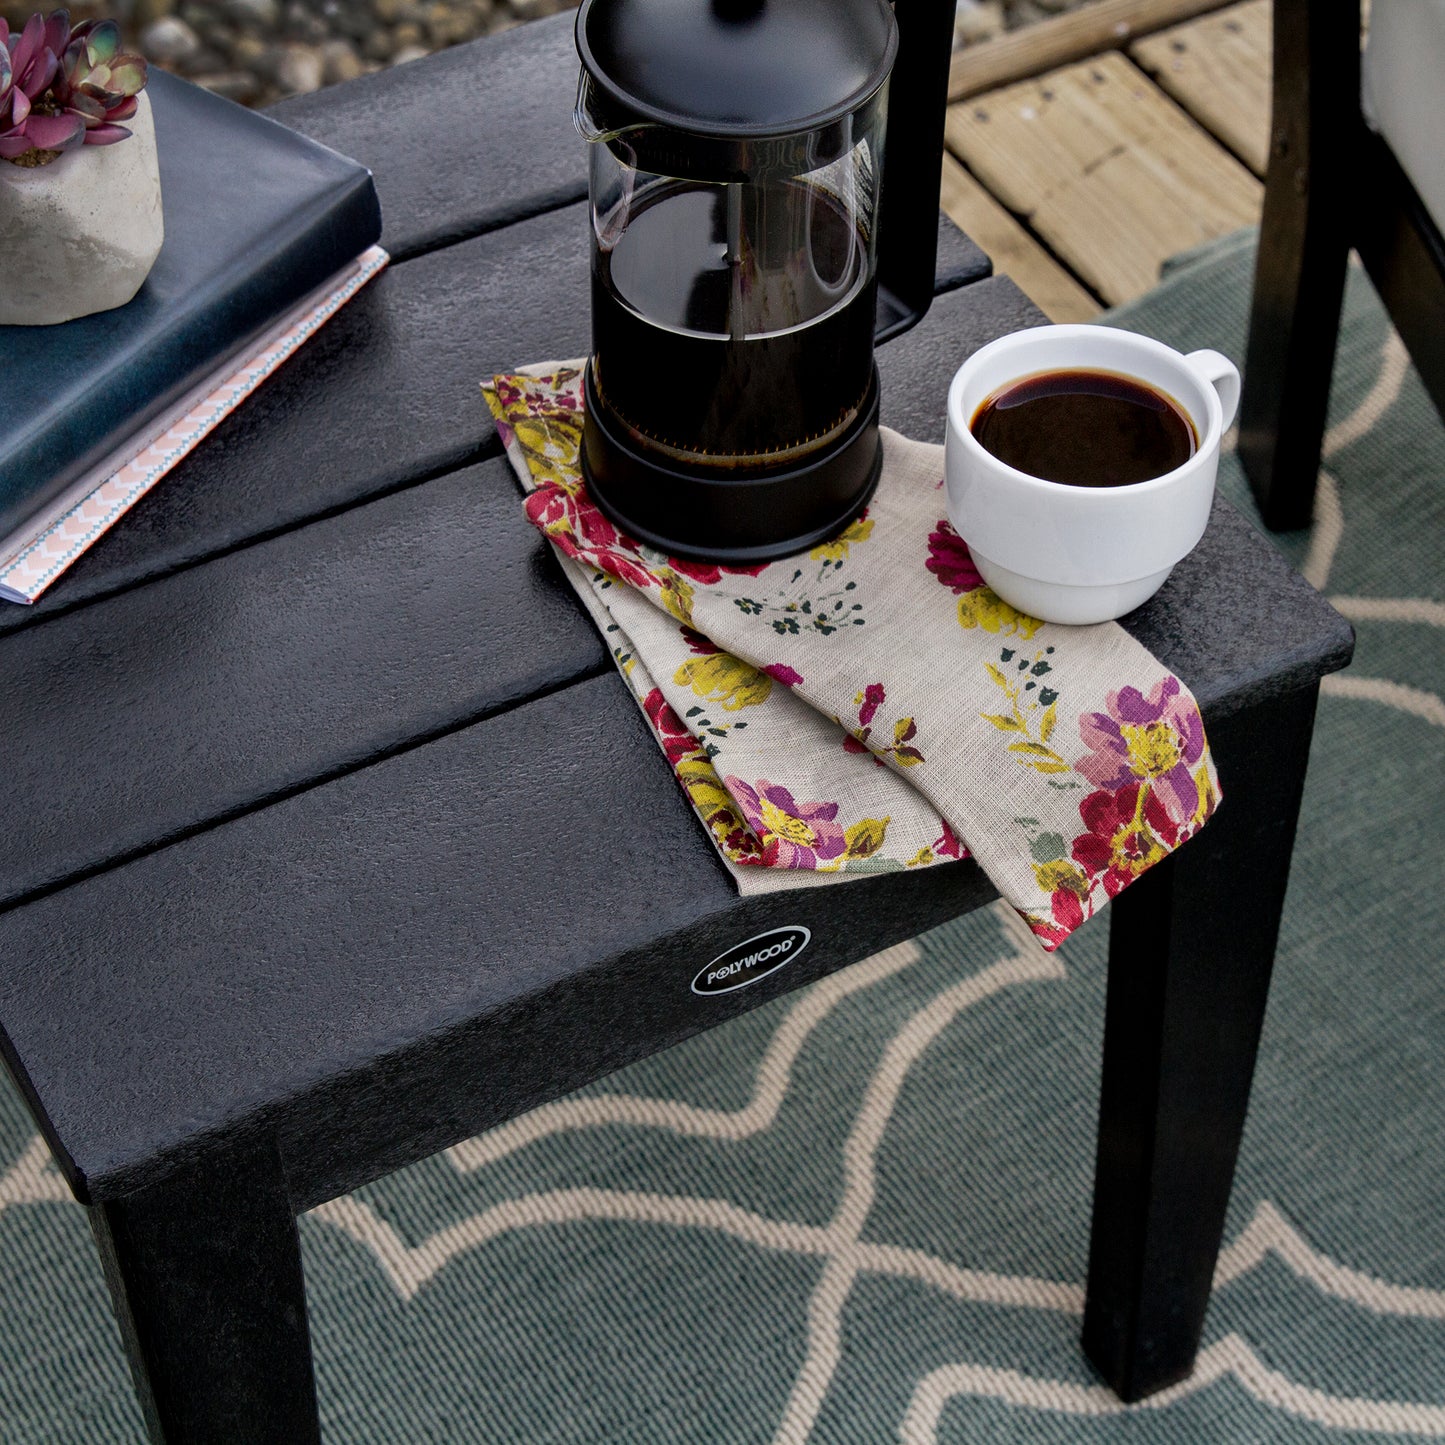 A coffee maker and a cup filled with coffee sit on a weather-resistant POLYWOOD Newport 18" End Table, partially covered by a colorful floral napkin, suggesting a peaceful outdoor coffee break.